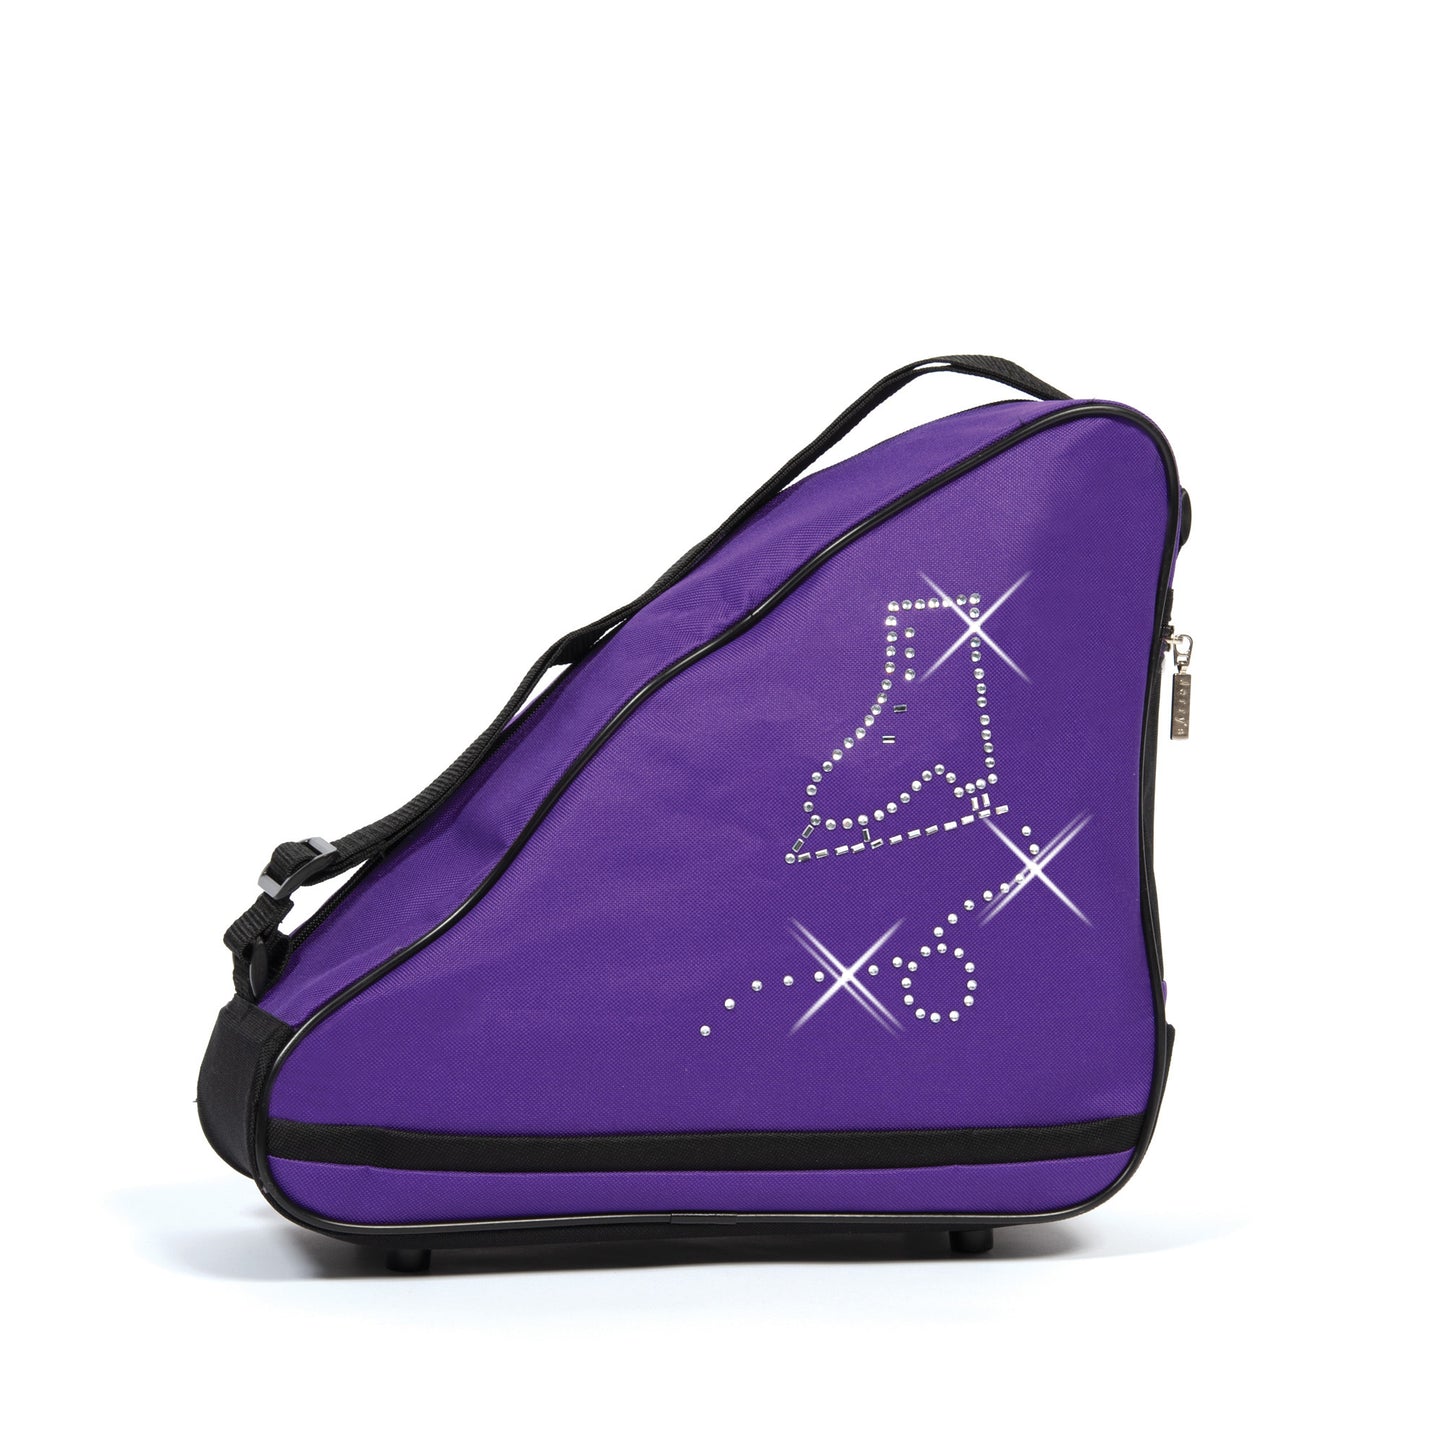 a purple suitcase sitting on a white surface 